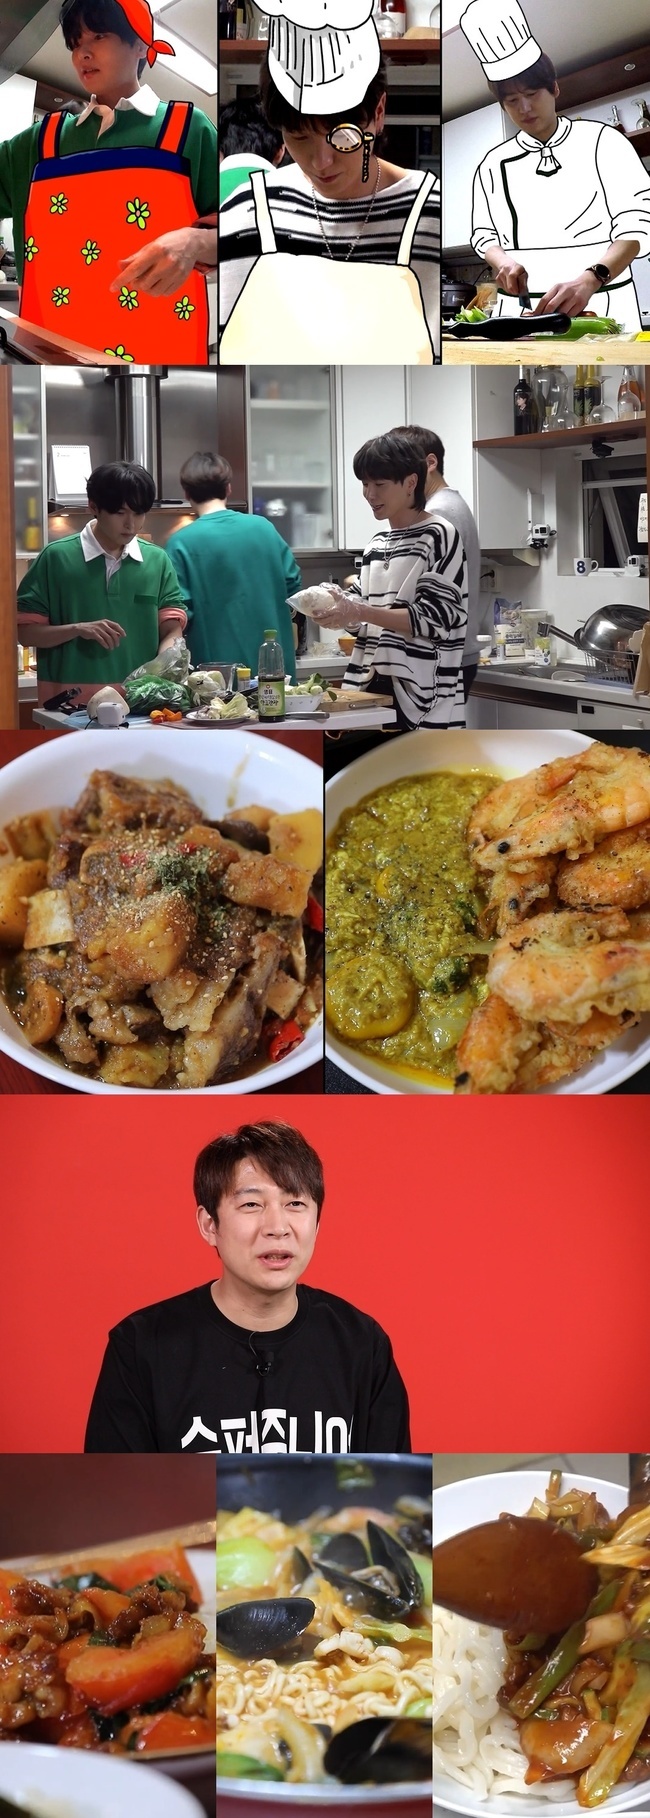 Super Junior plays Cuisine showdownMBC Point of Omniscient Interfere (planned by Park Jung-gyu / directed by Noshi Yong, Chae Hyun-seok / hereinafter Point of Omniscient Interfere) broadcast on March 13th, 144 times depicts the day of Super Junior, who played a pride-ridden Cuisine showdown.Cho Kyuhyun, who surprised viewers with his level of Cuisine ability in the last Point of Omniscient Interfere broadcast.Leeteuk and Kim Ryeowook will play the third round of Cuisine confrontation with Cho Kyuhyun on the day of the broadcast.Manager adds to the question, The three Cuisine styles are completely different.First, Kim Ryeowook is surprised to show off his long-standing hard work: Kim Ryeowooks nickname during his quarters was Mrs.When I was living together in the hostel, Kim Ryeowook always did Cuisine, Manager said.